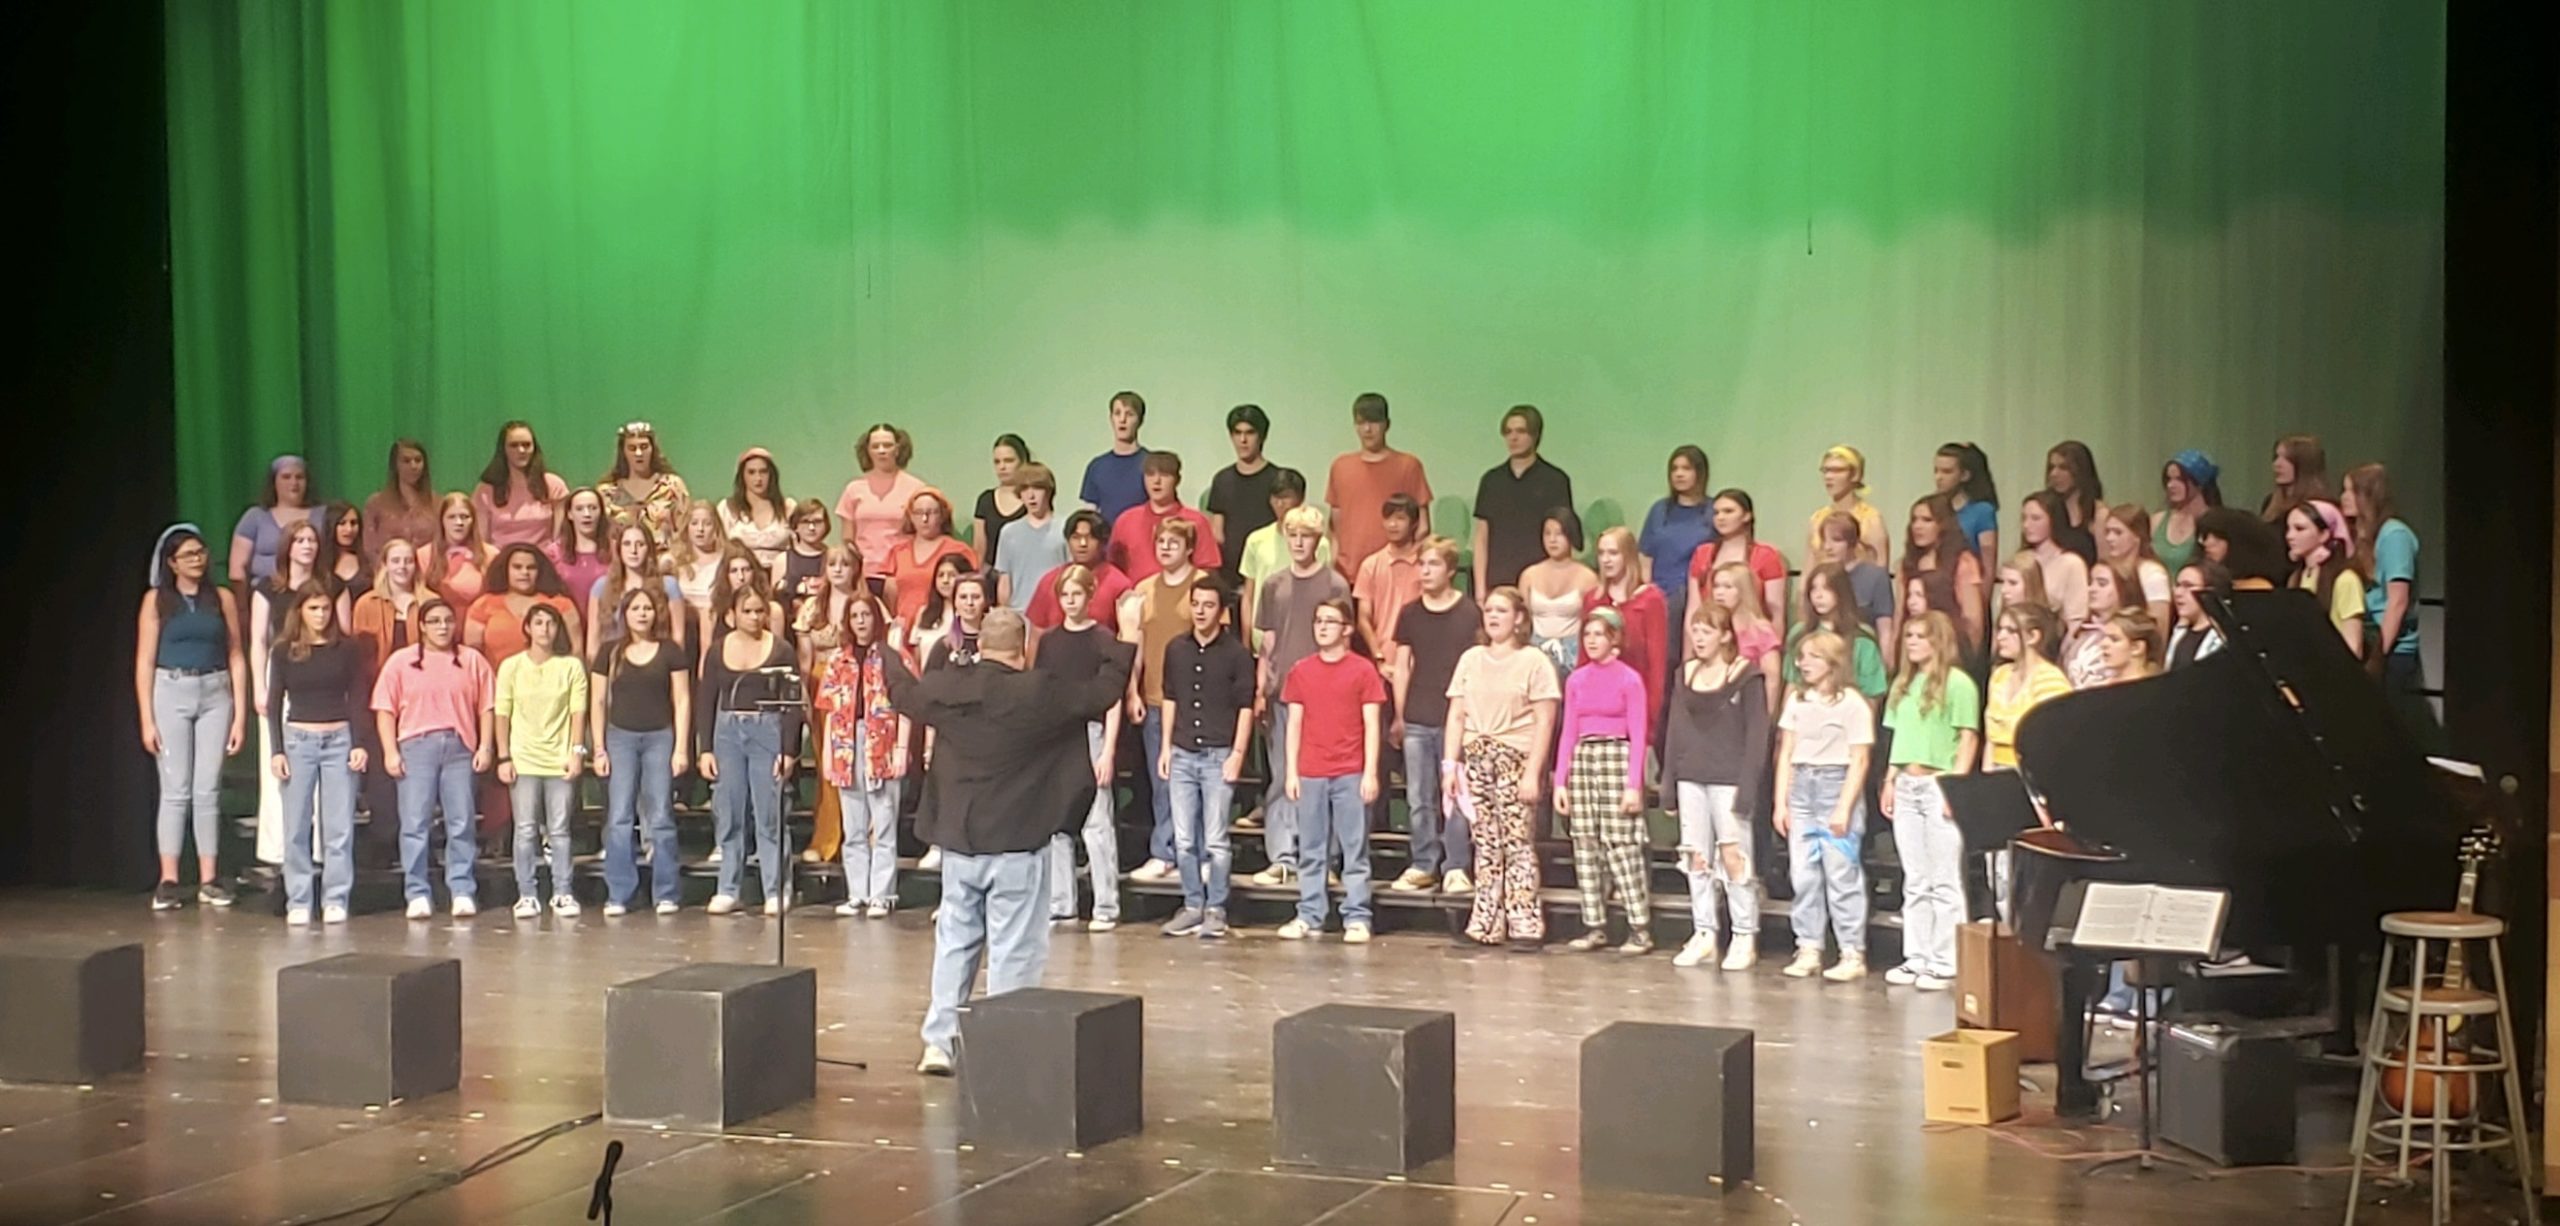 All of Silver Creek’s choirs (Bella Voce, Fella Broce [Tenor/Bass Choir], Treble Choir, and Concert Choir) end the Farewell Concert this past Wednesday by singing ‘Bridge Over Troubled Water’.